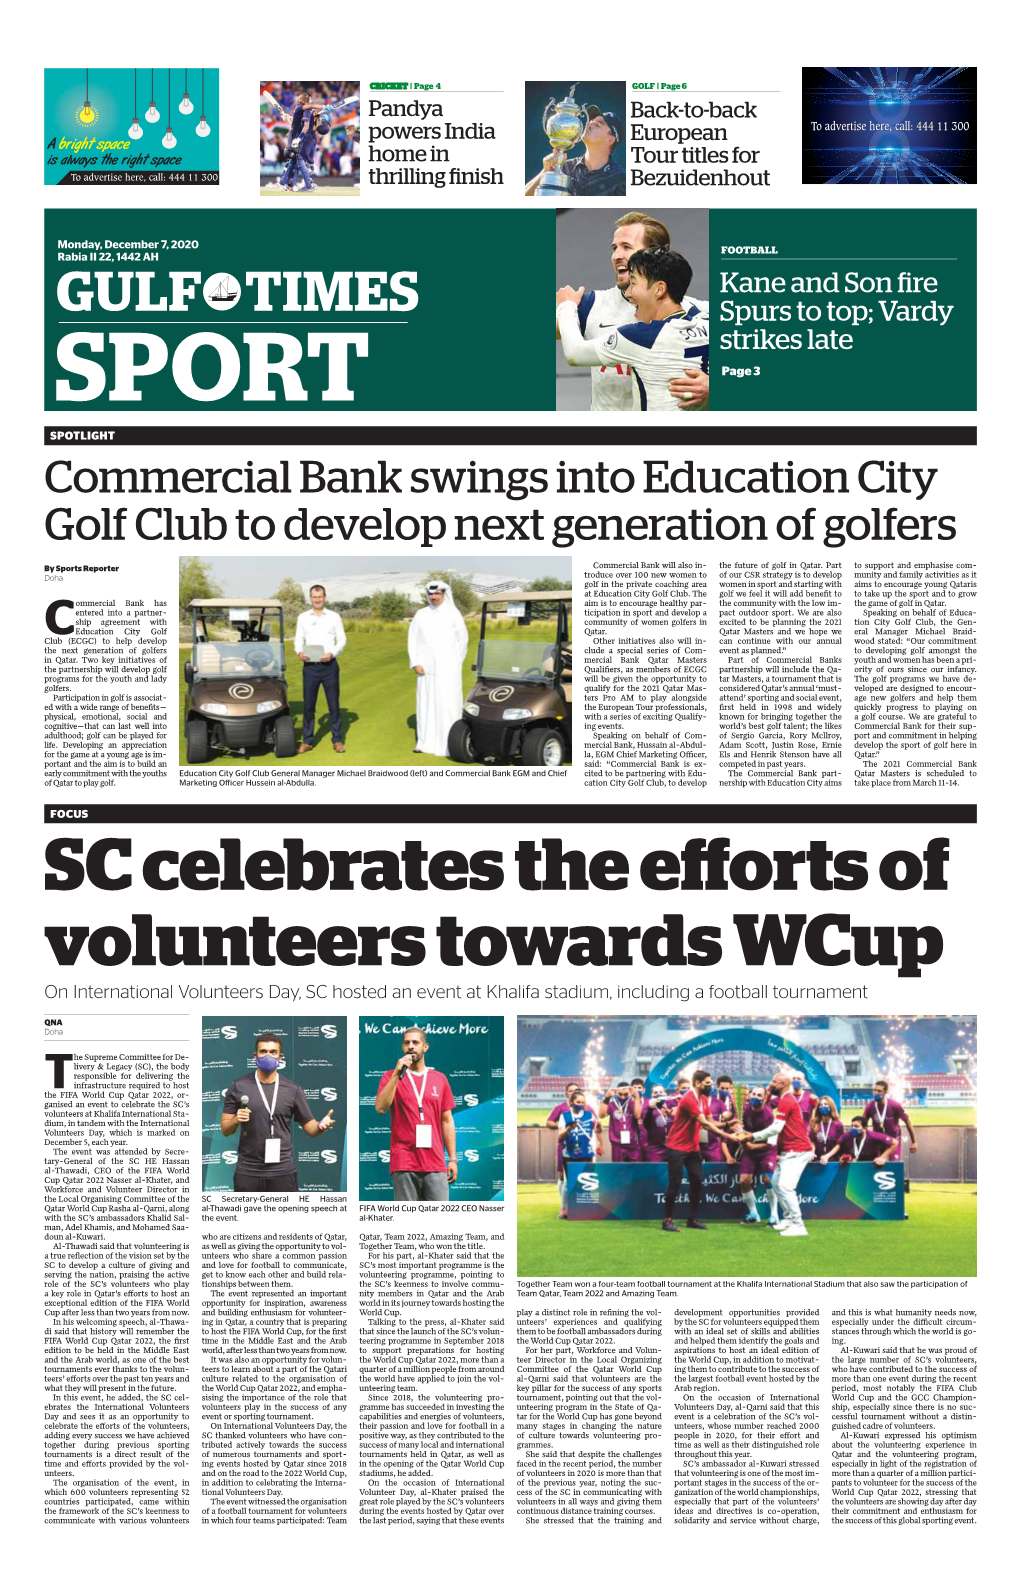 SPORT Page 3 SPOTLIGHT Commercial Bank Swings Into Education City Golf Club to Develop Next Generation of Golfers